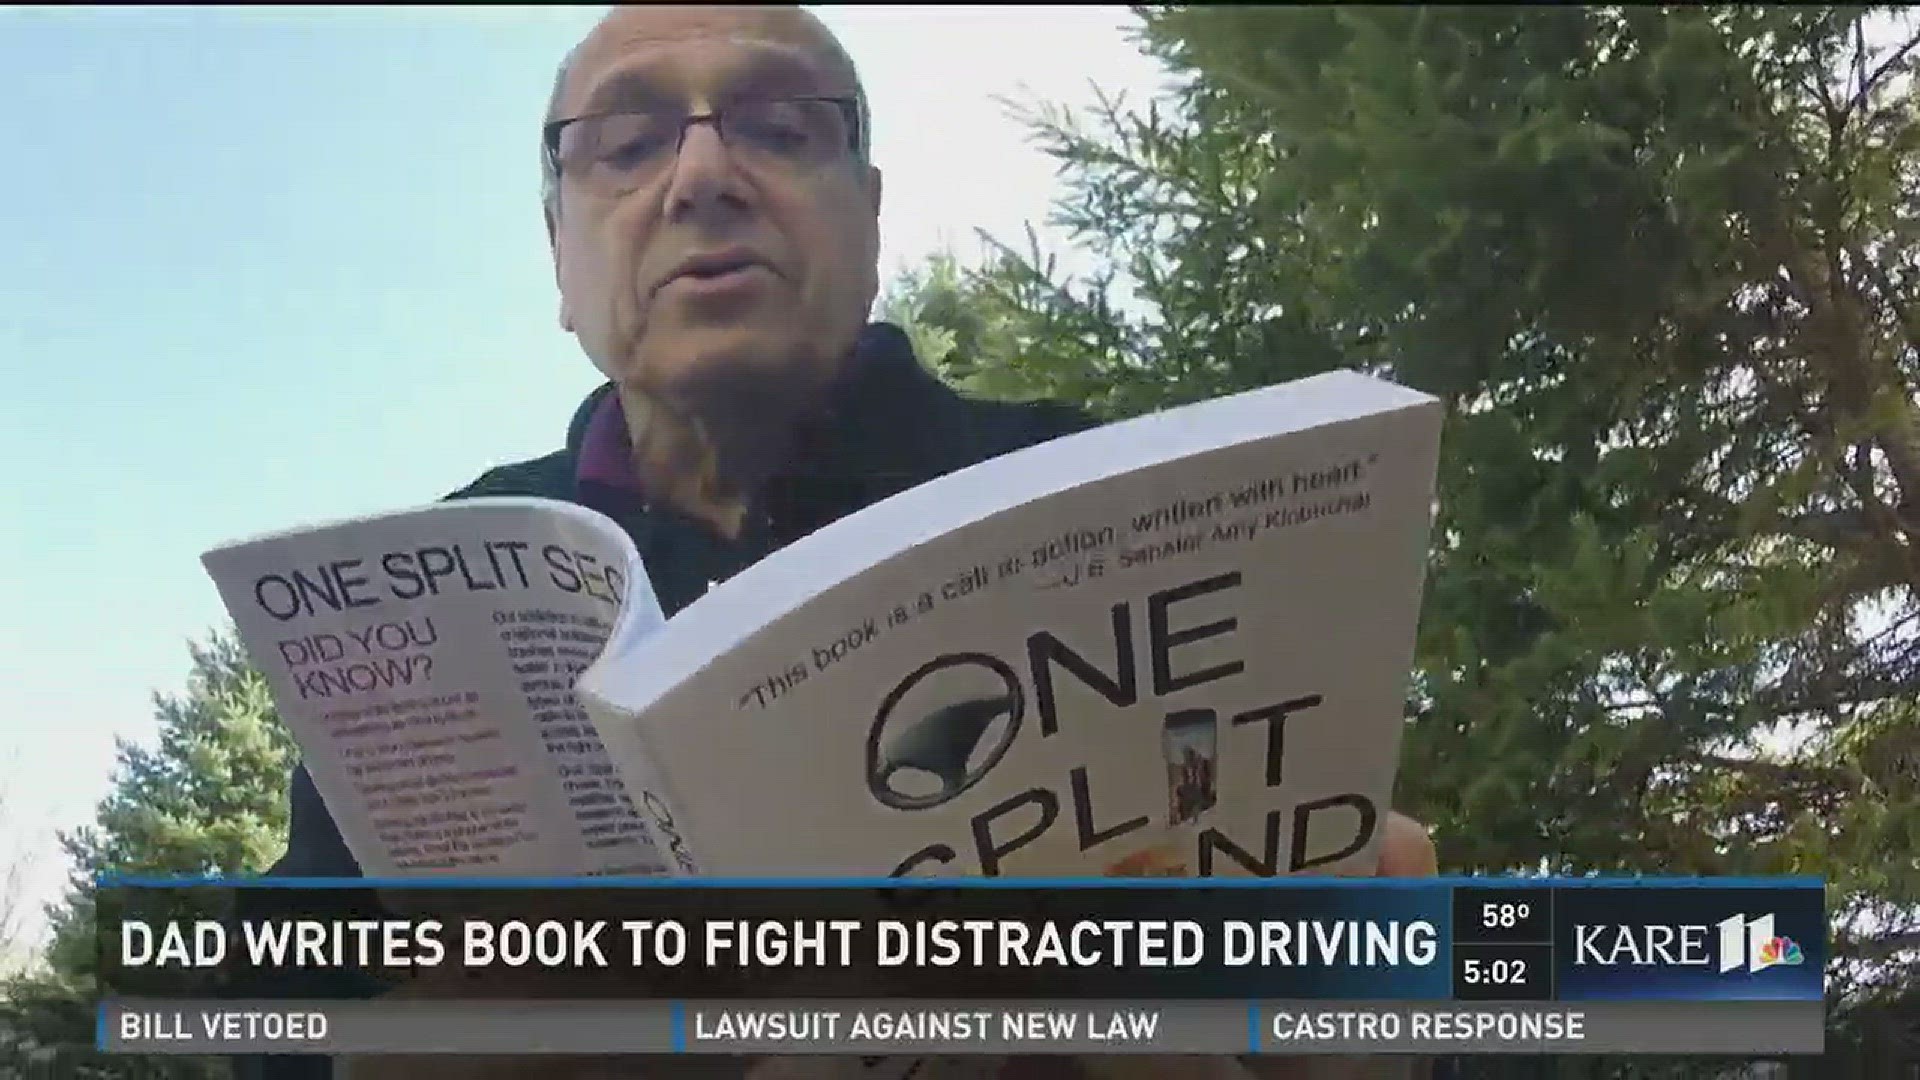 Dad writes book to fight distracted driving